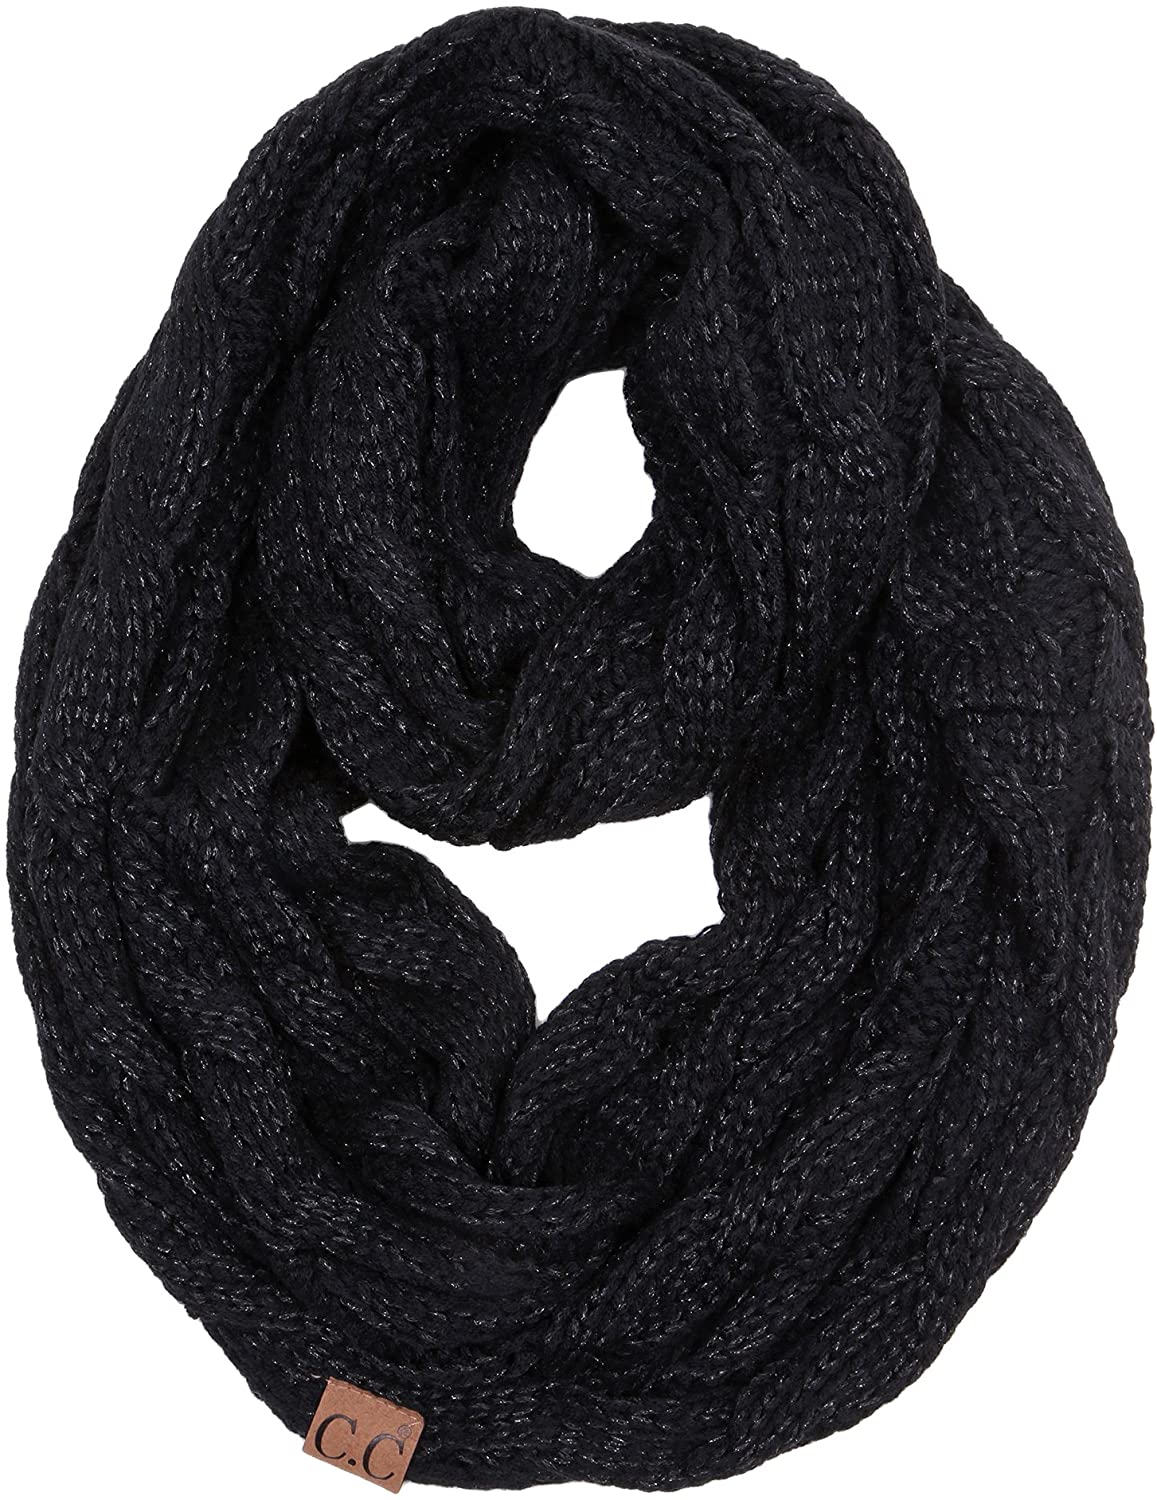 Funky Junque’s Beanies Matching Ribbed Winter Warm Cable Knit Infinity Scarf